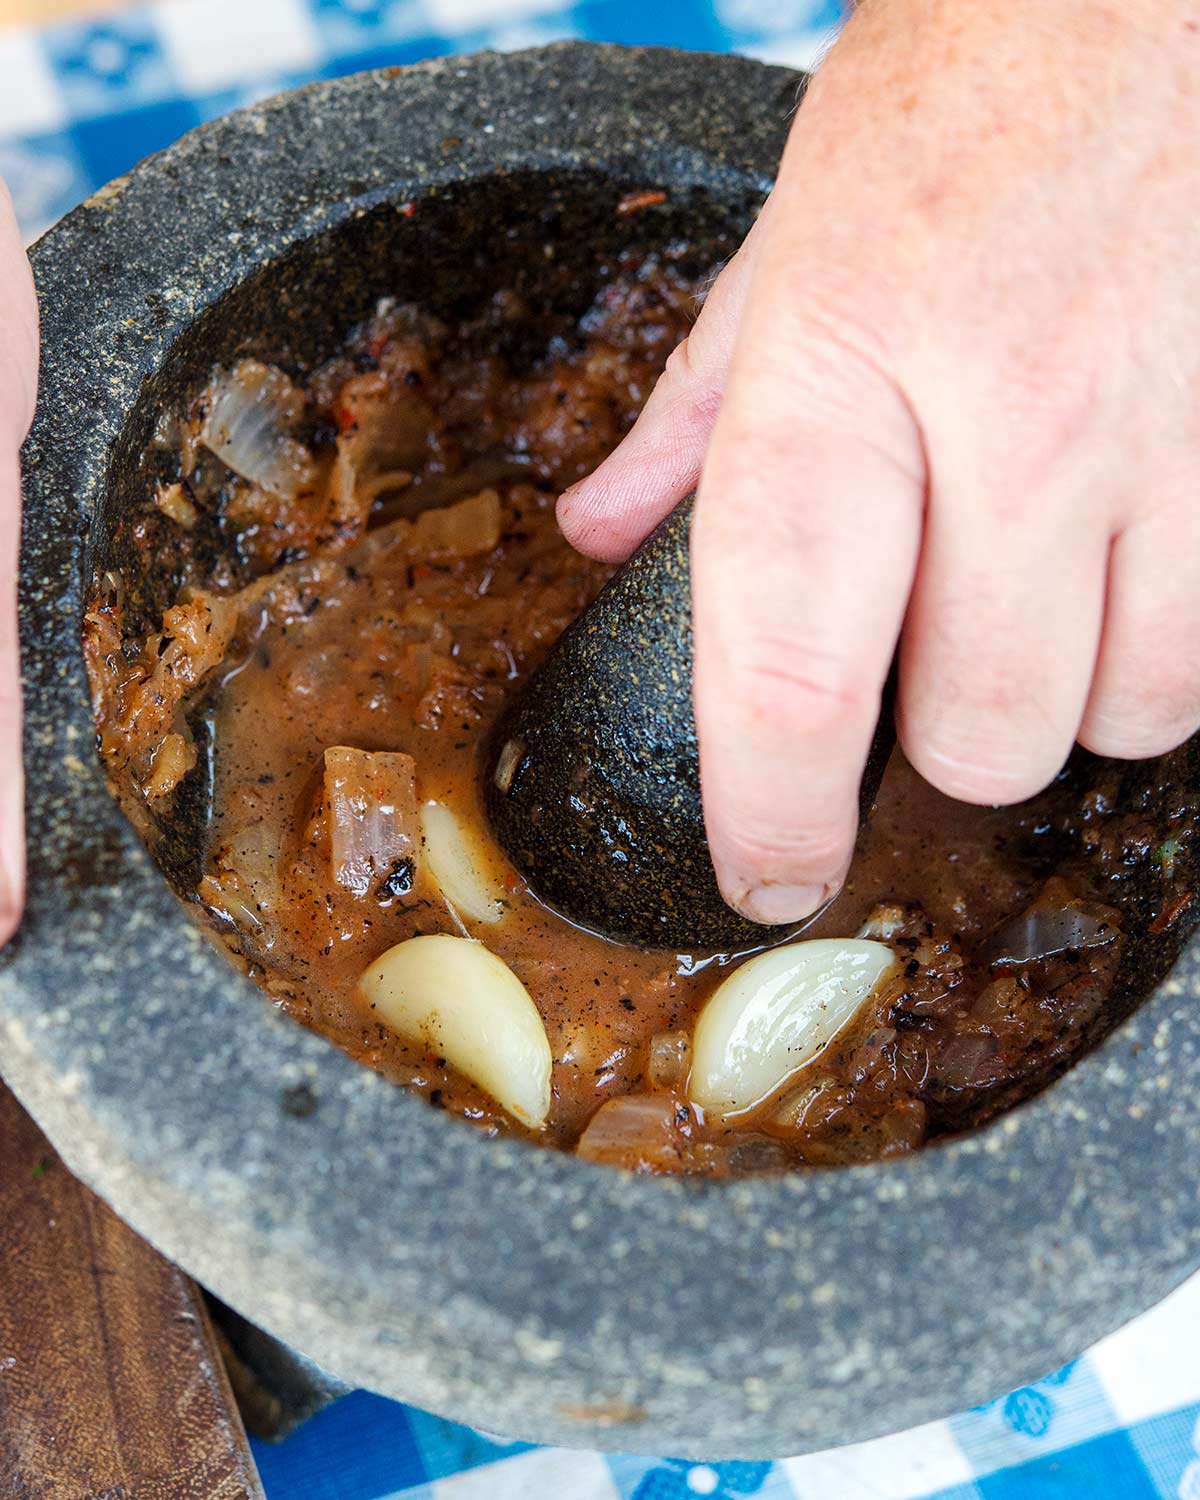 Grinding the roasted salsa in a molcajete